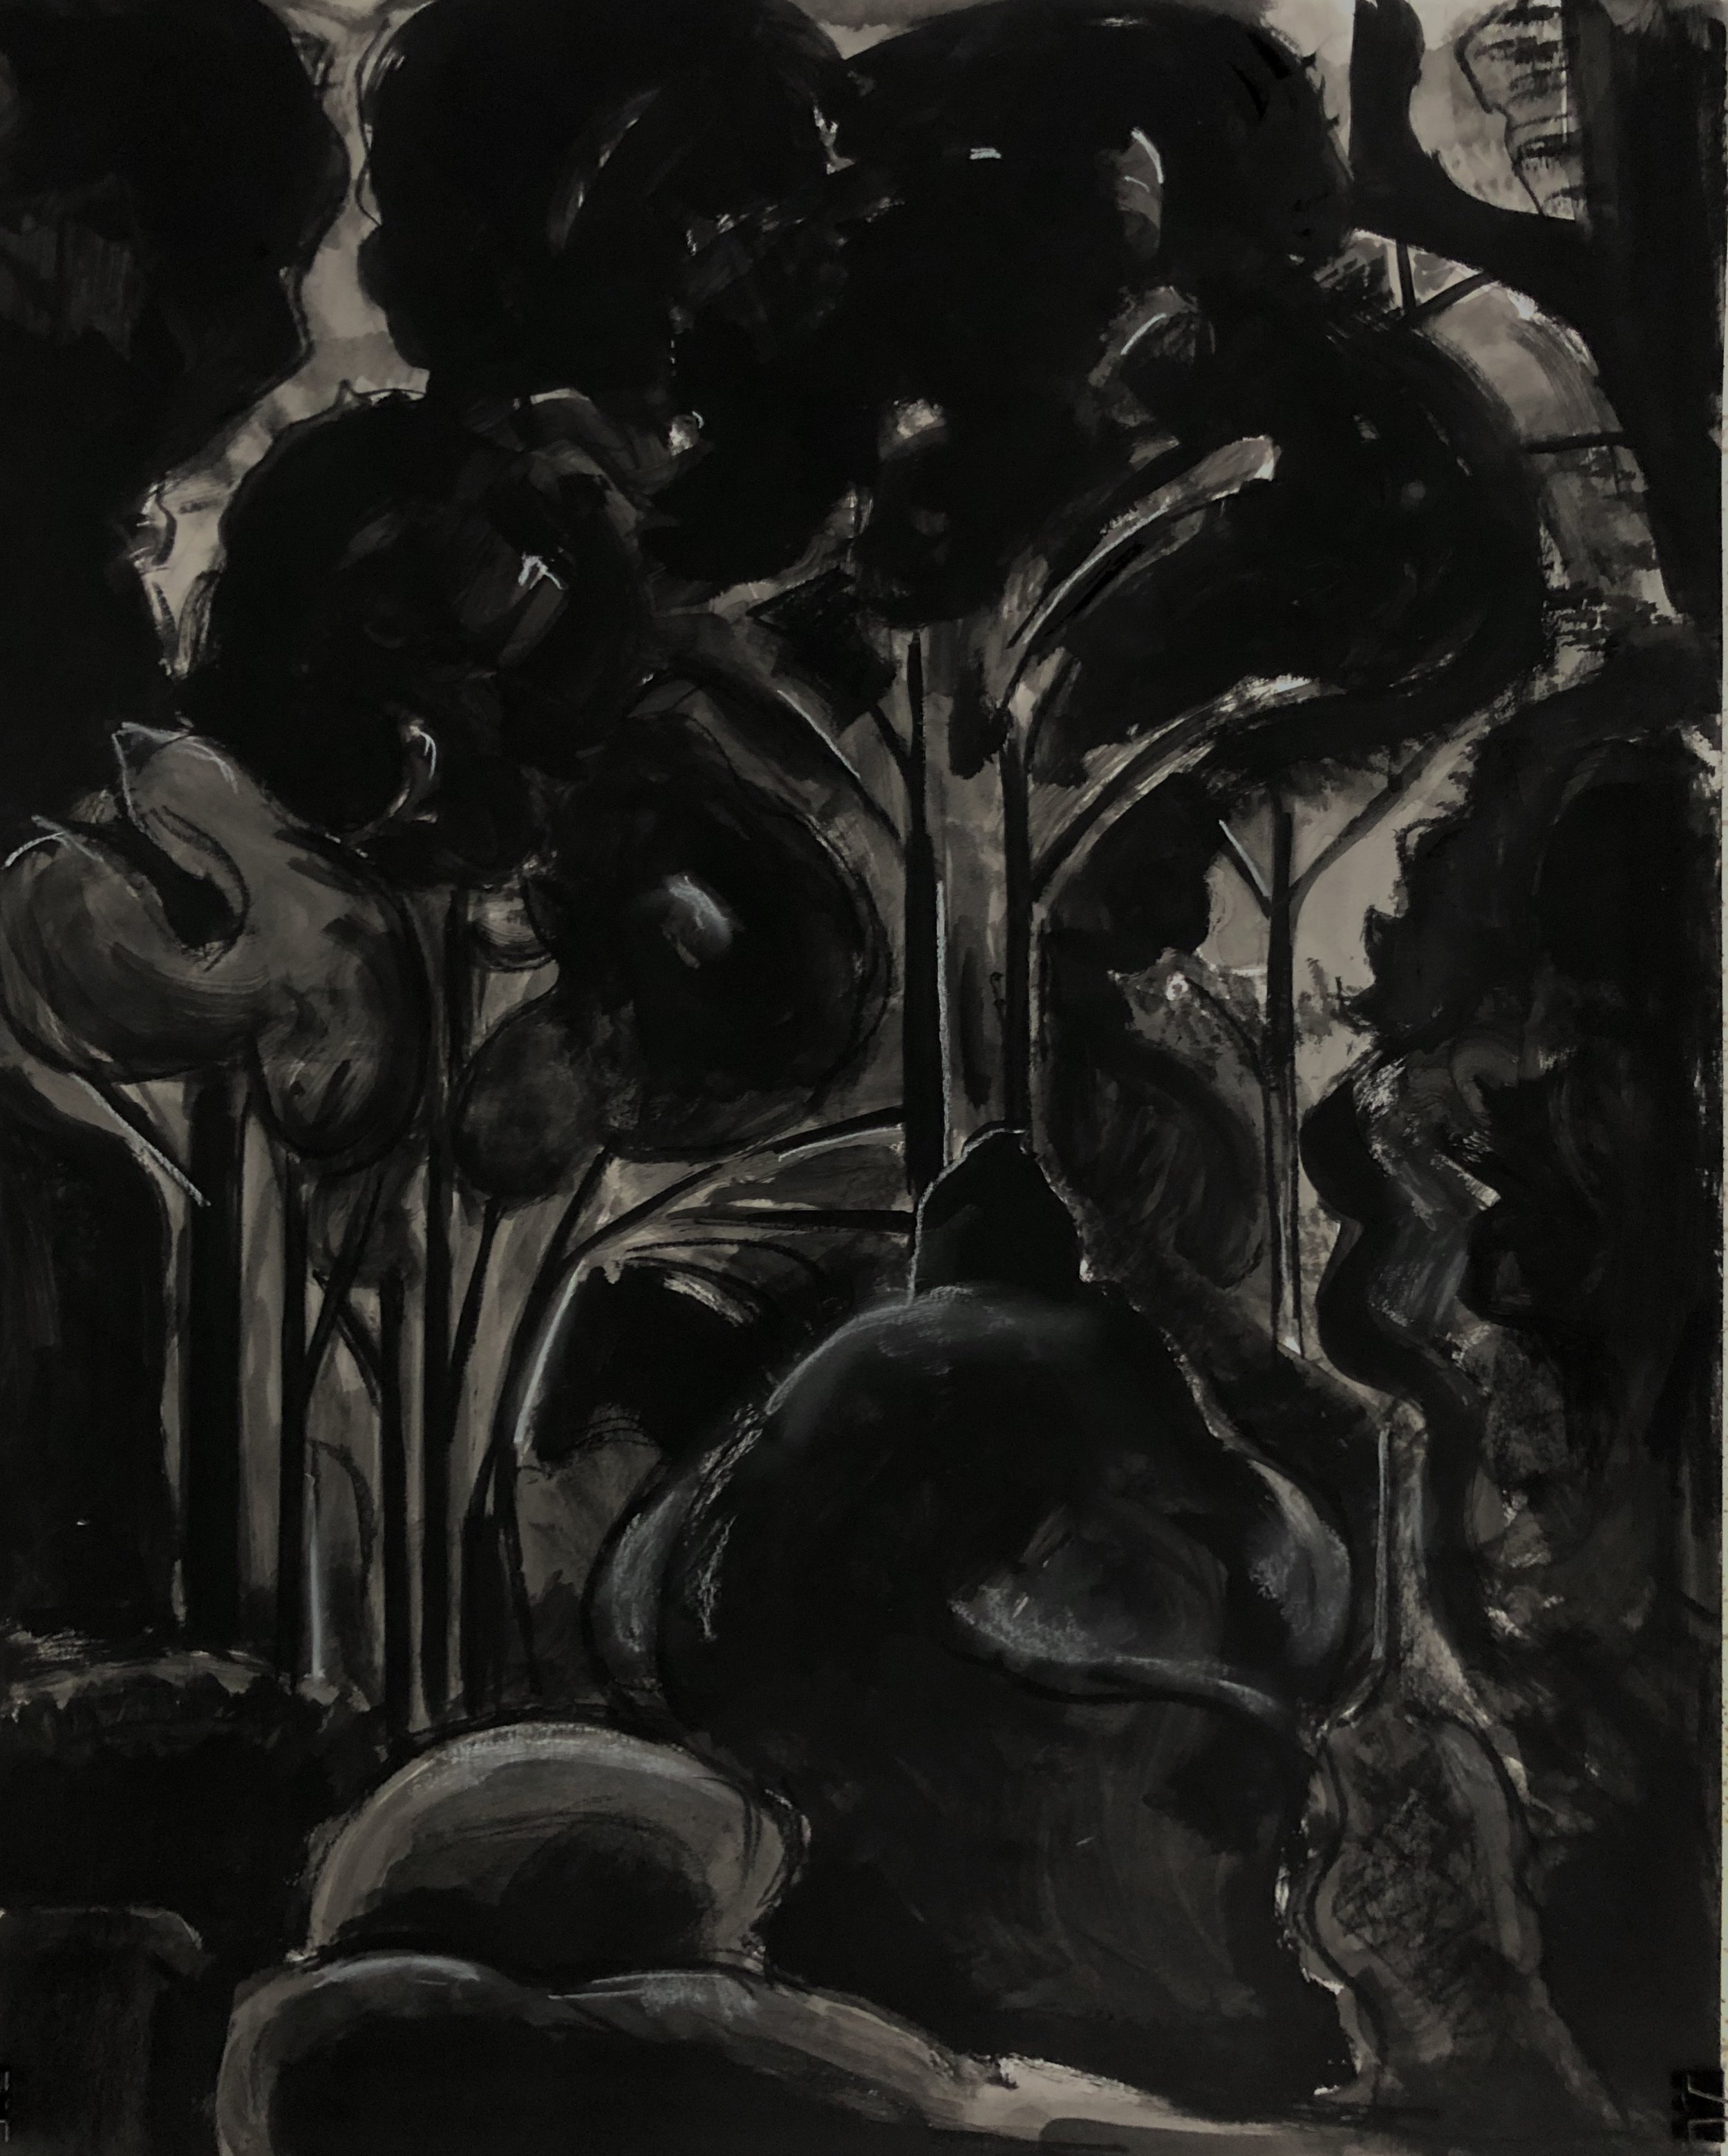    Dark Woods III,   ink and charcoal, 24 x 19 in, 2020 